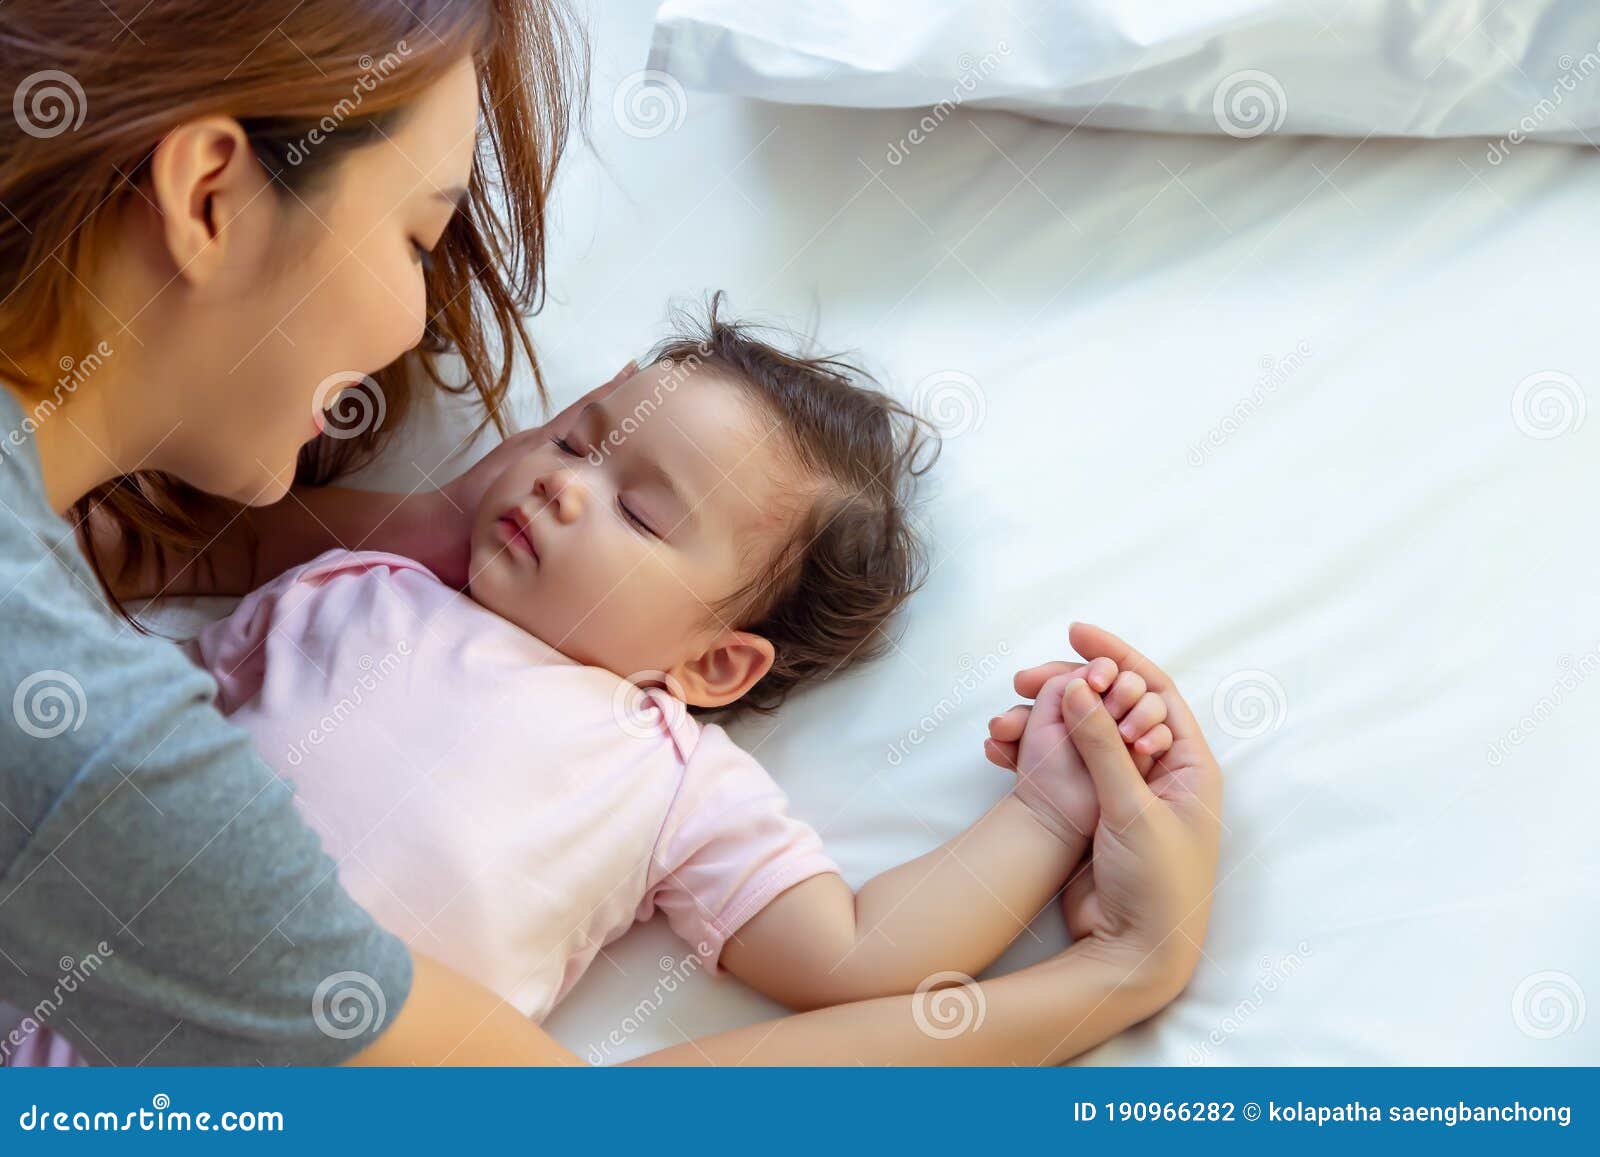 asian mother lull kid, adopt little girl to be her protege or daughter single mother admire with love, fondness of caucasian